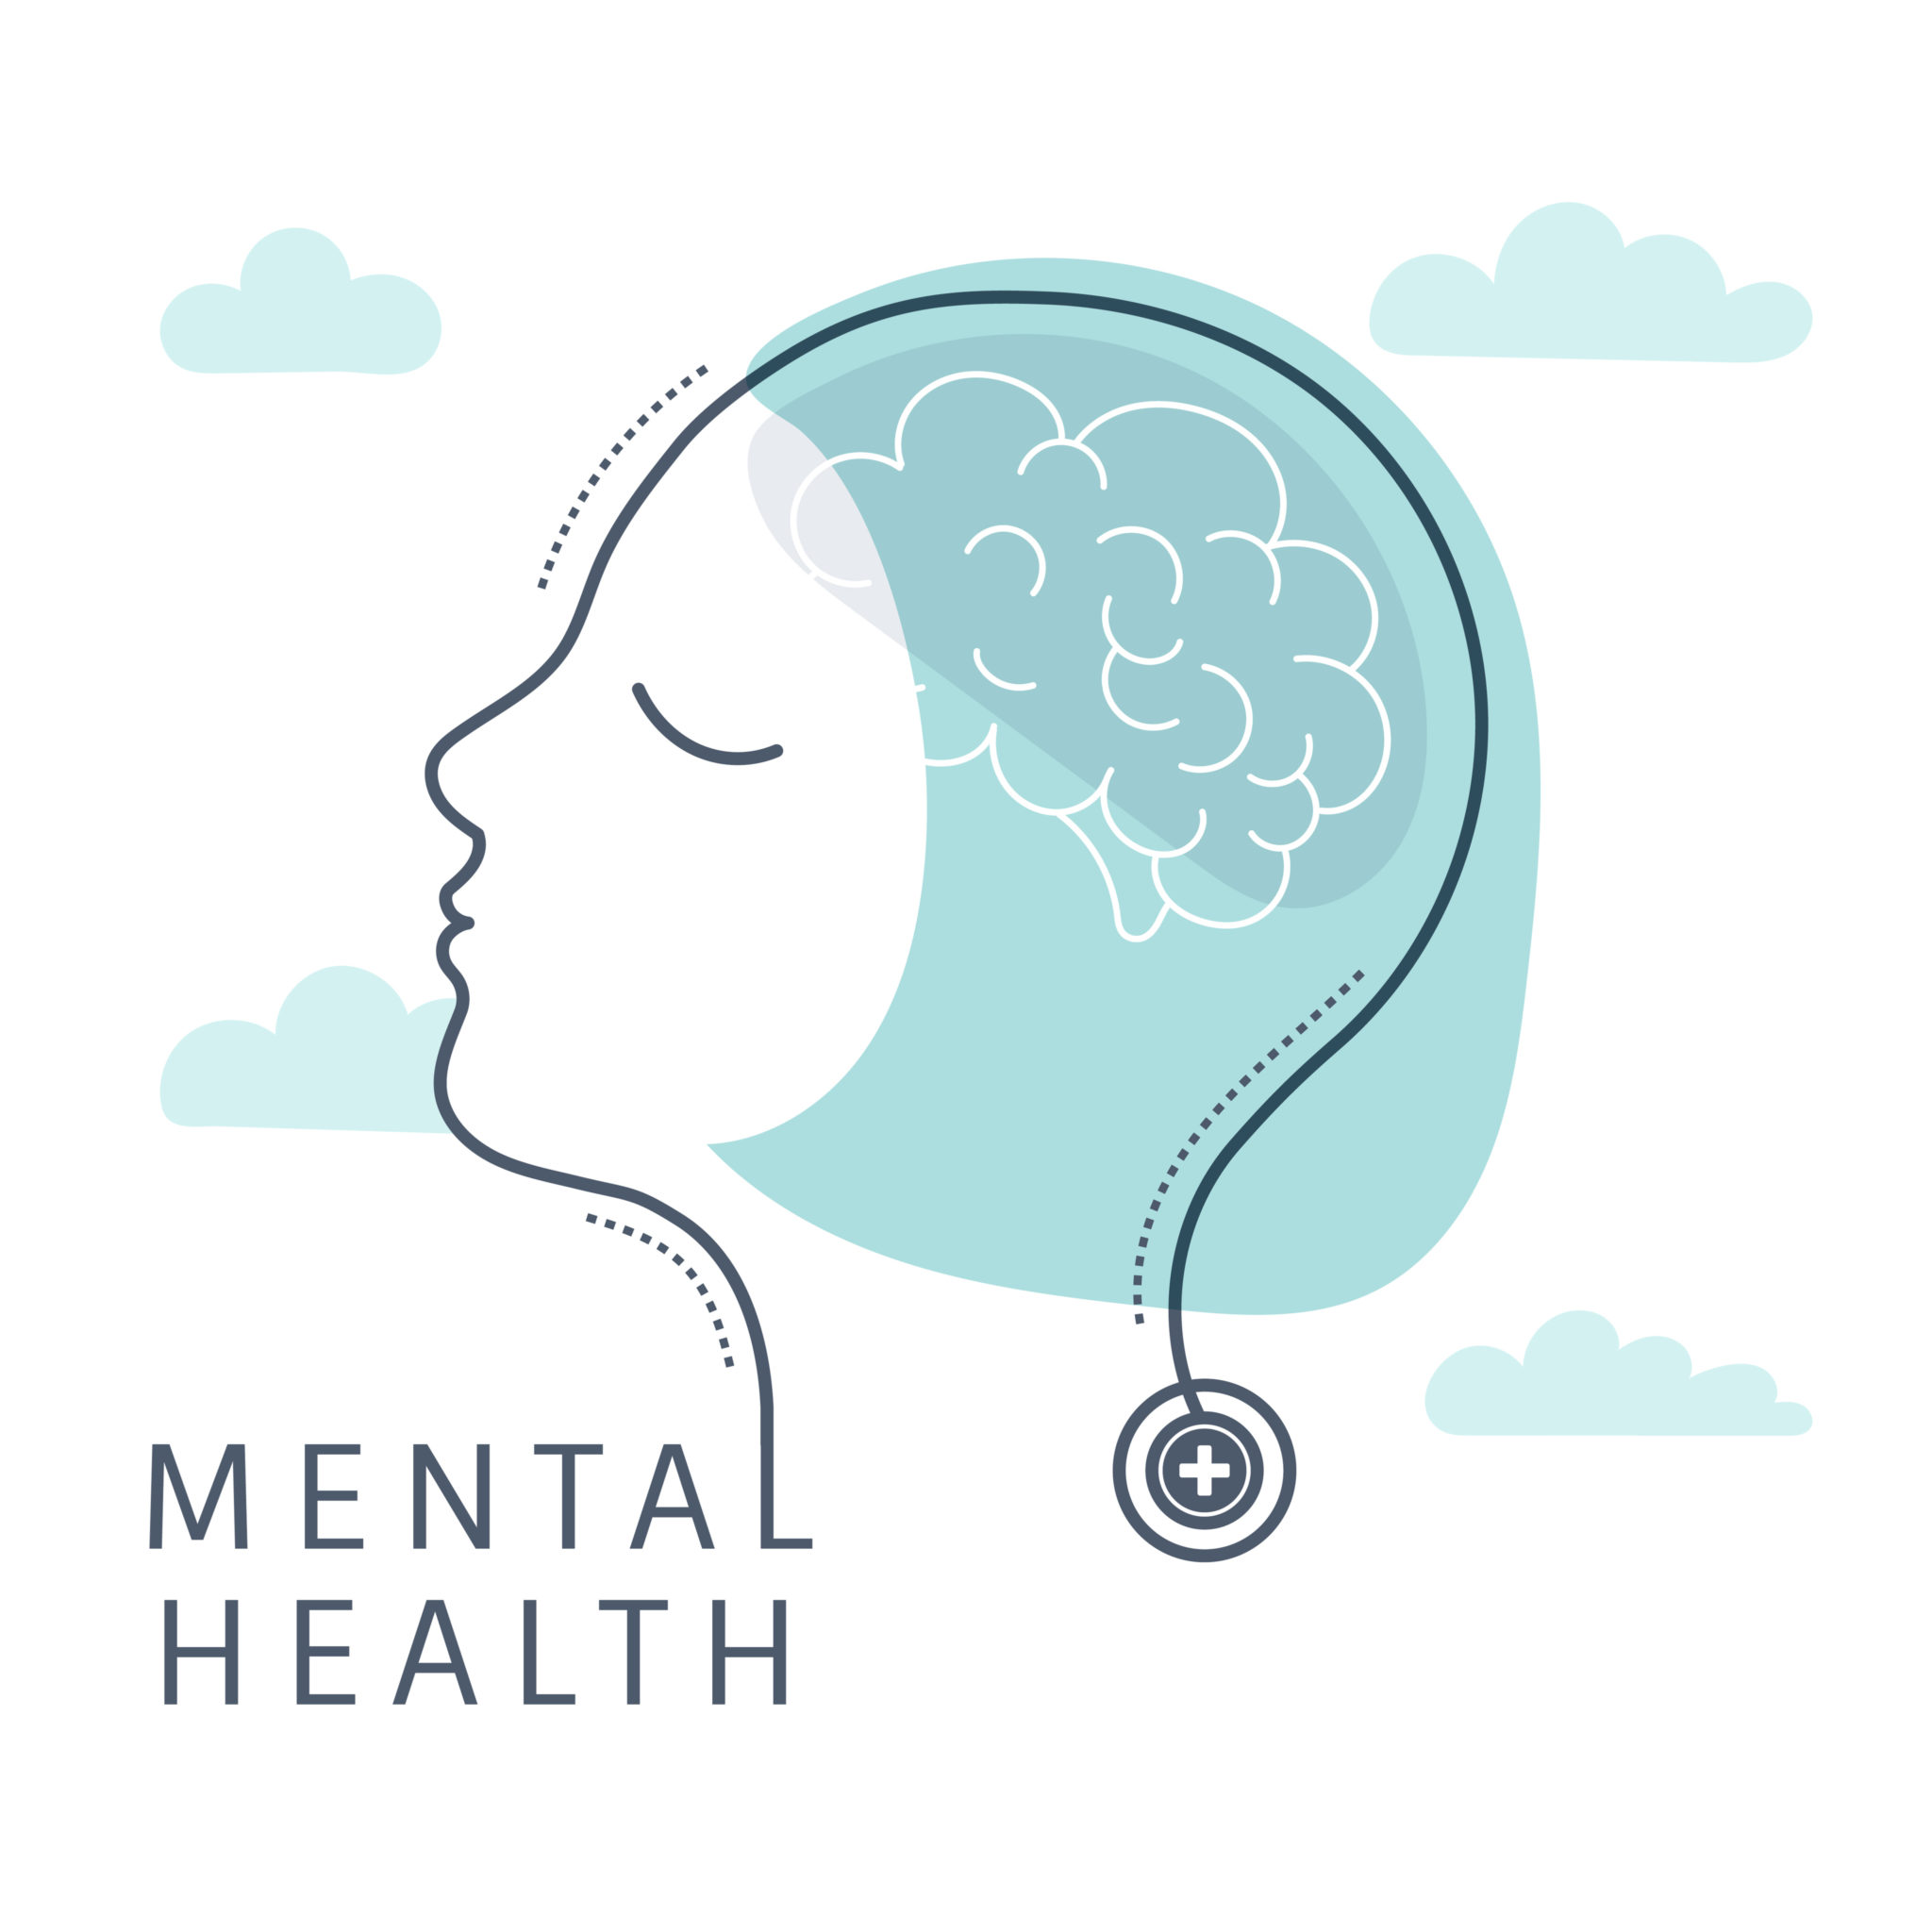 Mental Health, Alcohol and Other Drugs and Suicide Prevention Summit – Queensland Mental Health Commission November 2019.